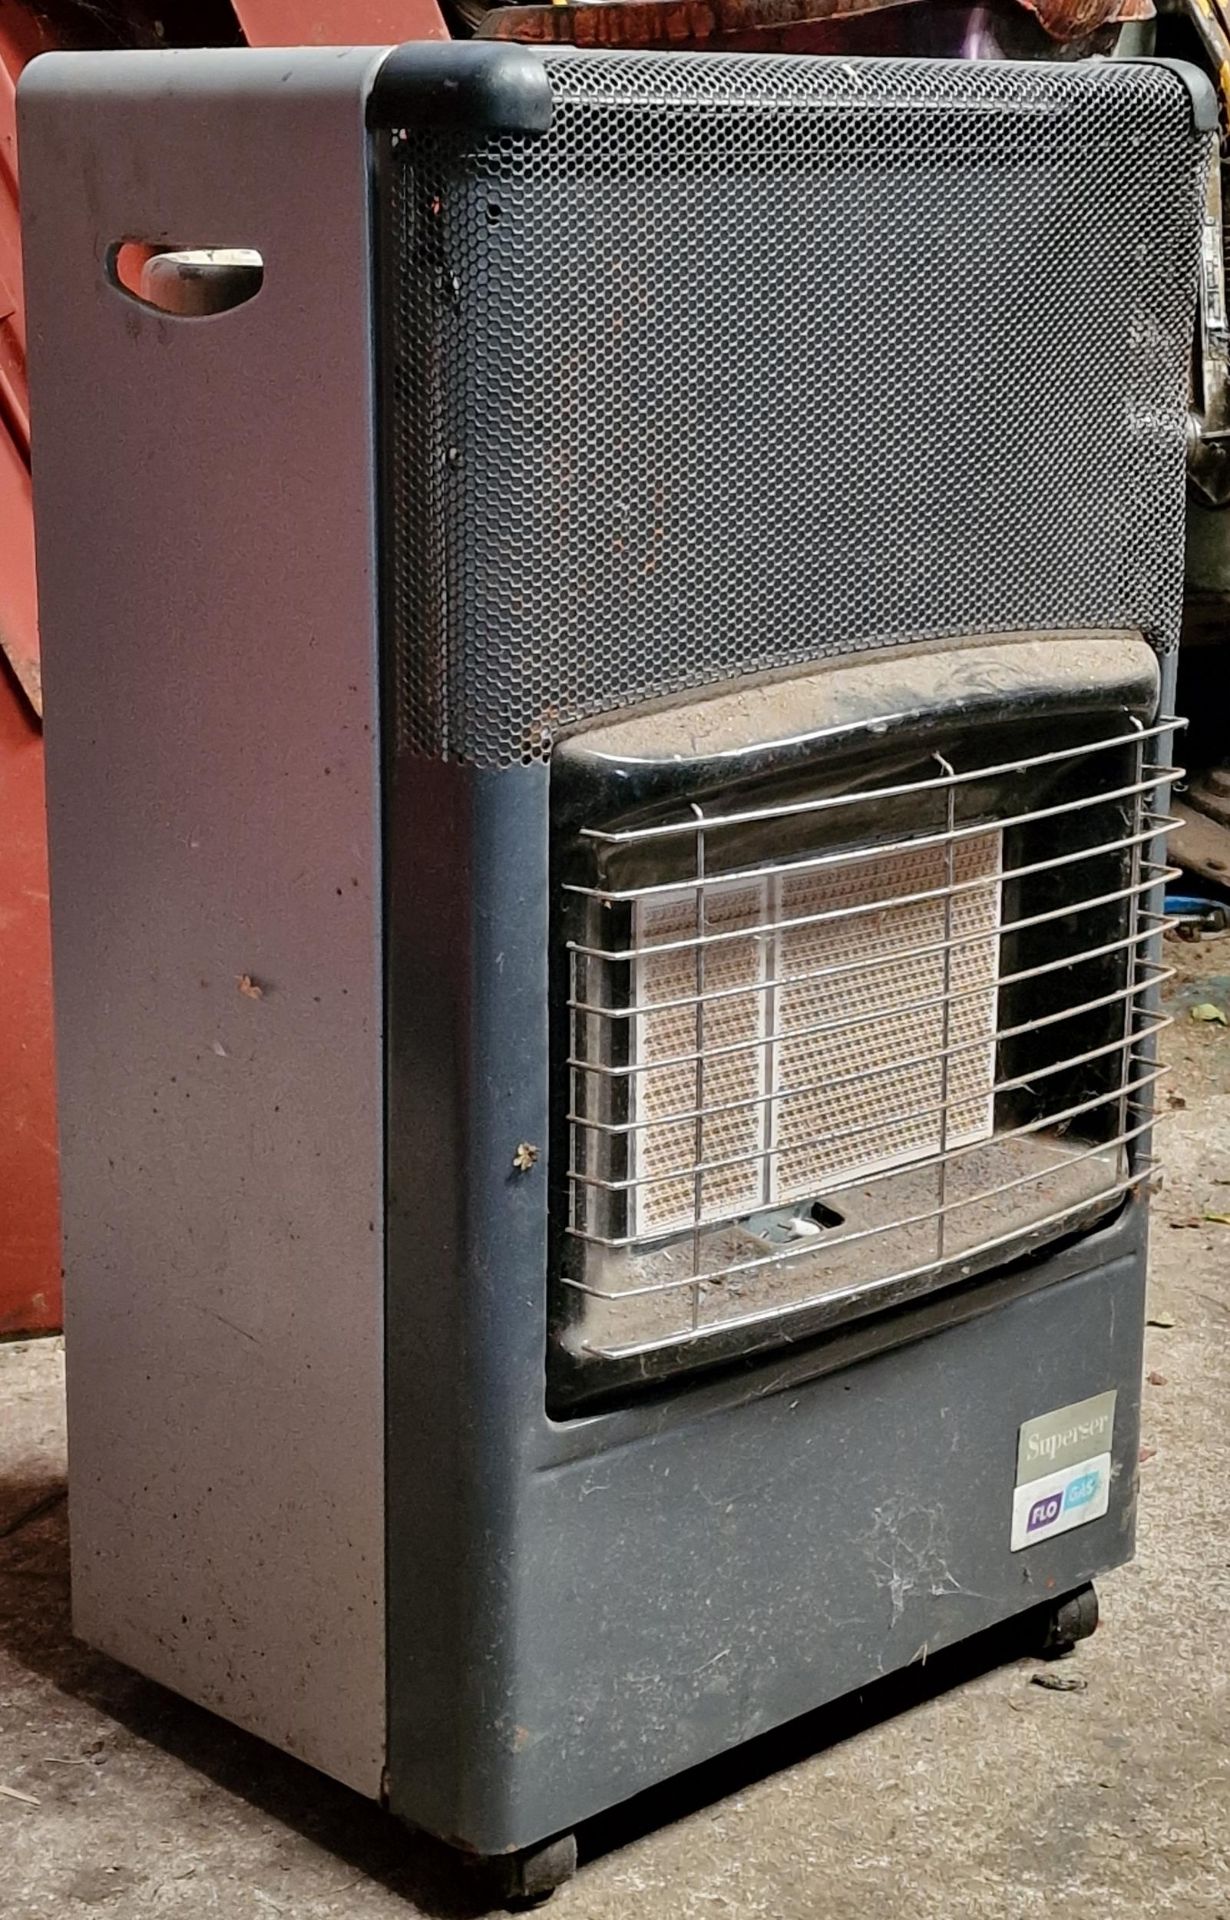 Superser gas heater with bottle together with a Draper heater (2)